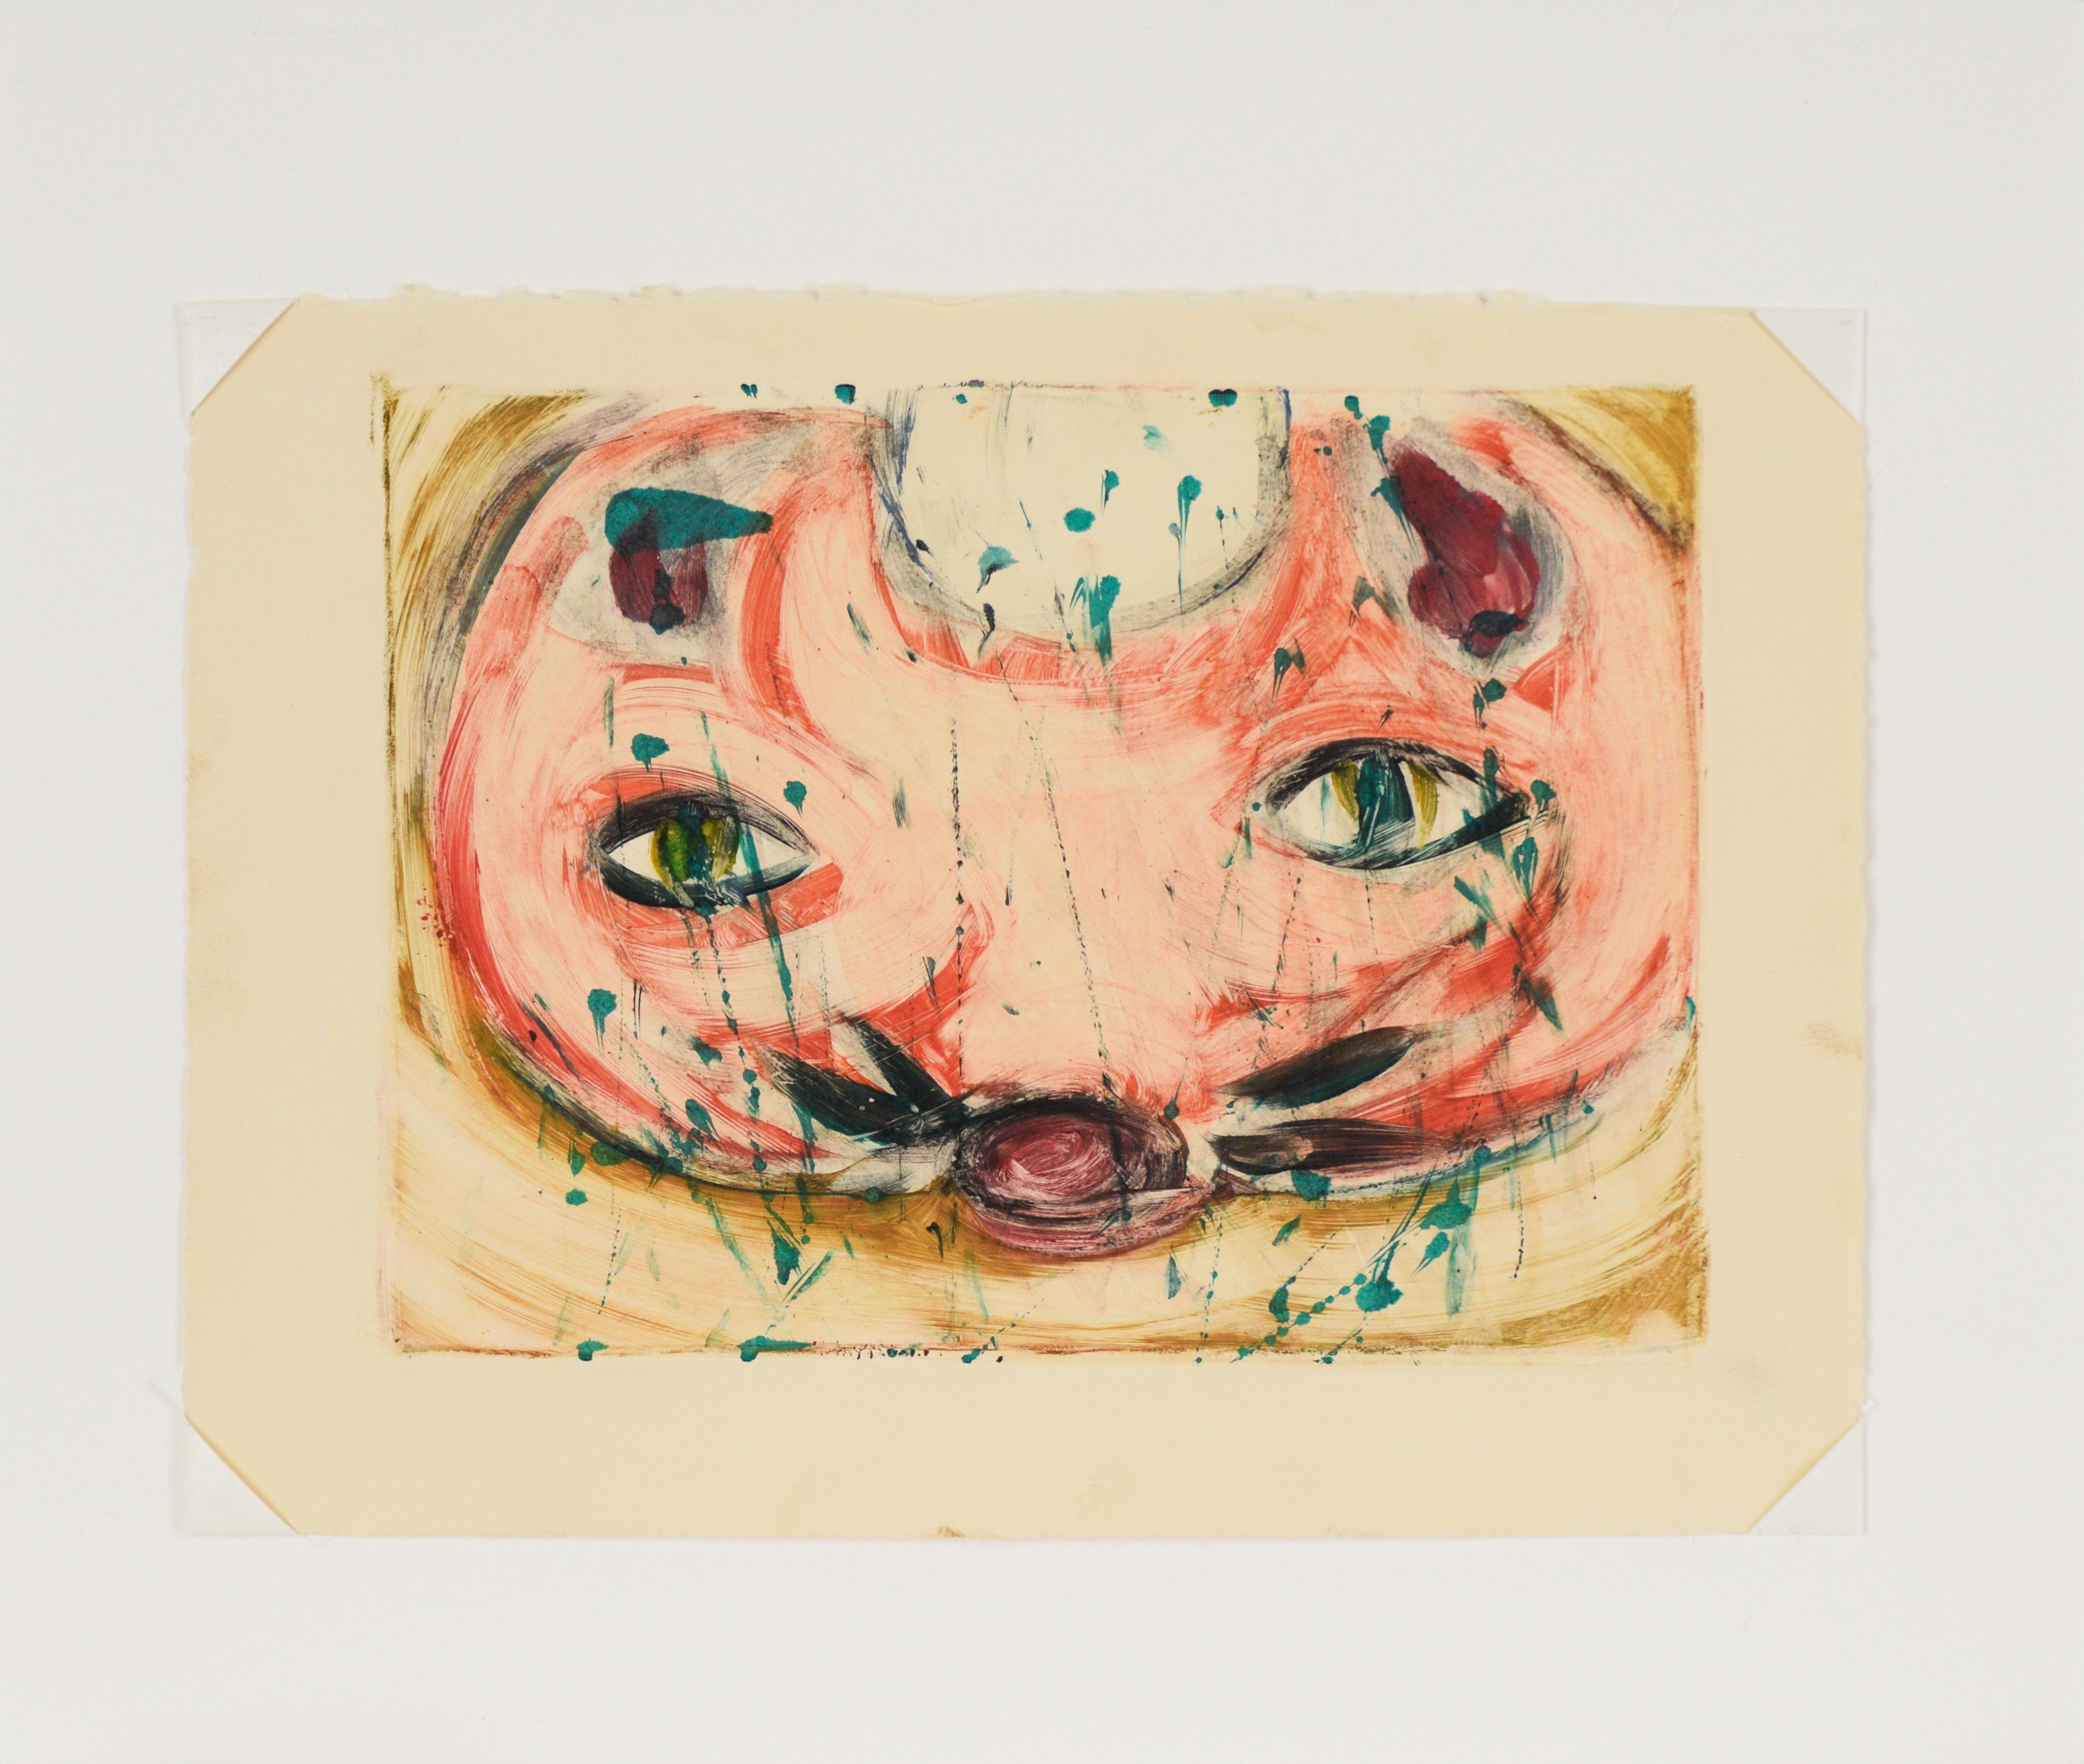 A Cat's Eyes - Transfer Monotype in Water Based Ink on Paper - Painting by Heather Speck